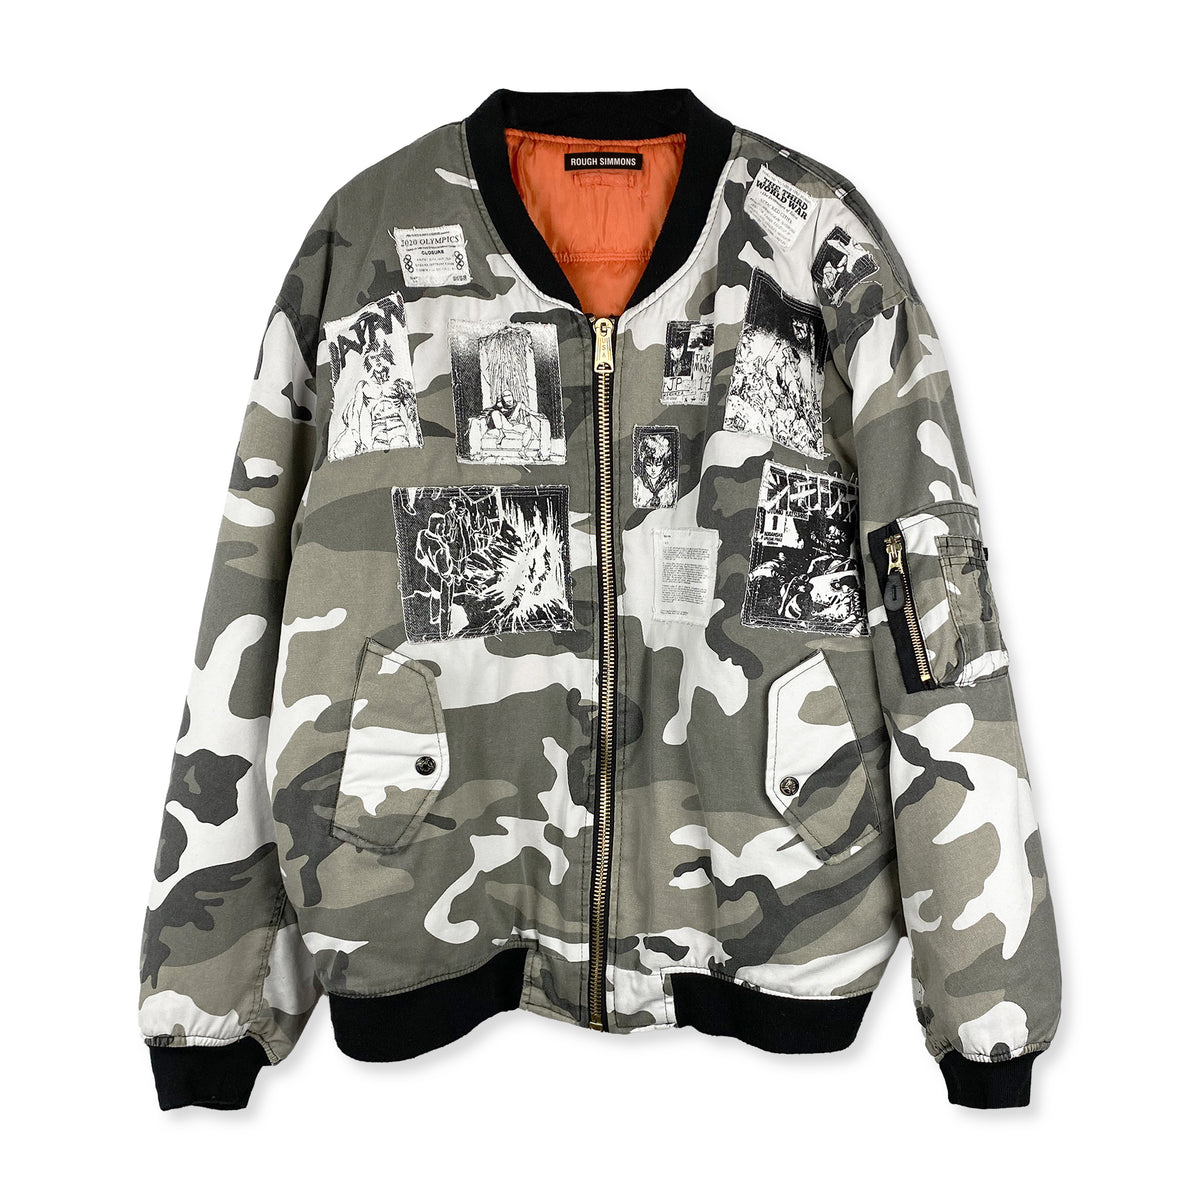 Black and White Neo-Tokyo Bomber Jacket – ROUGH SIMMONS